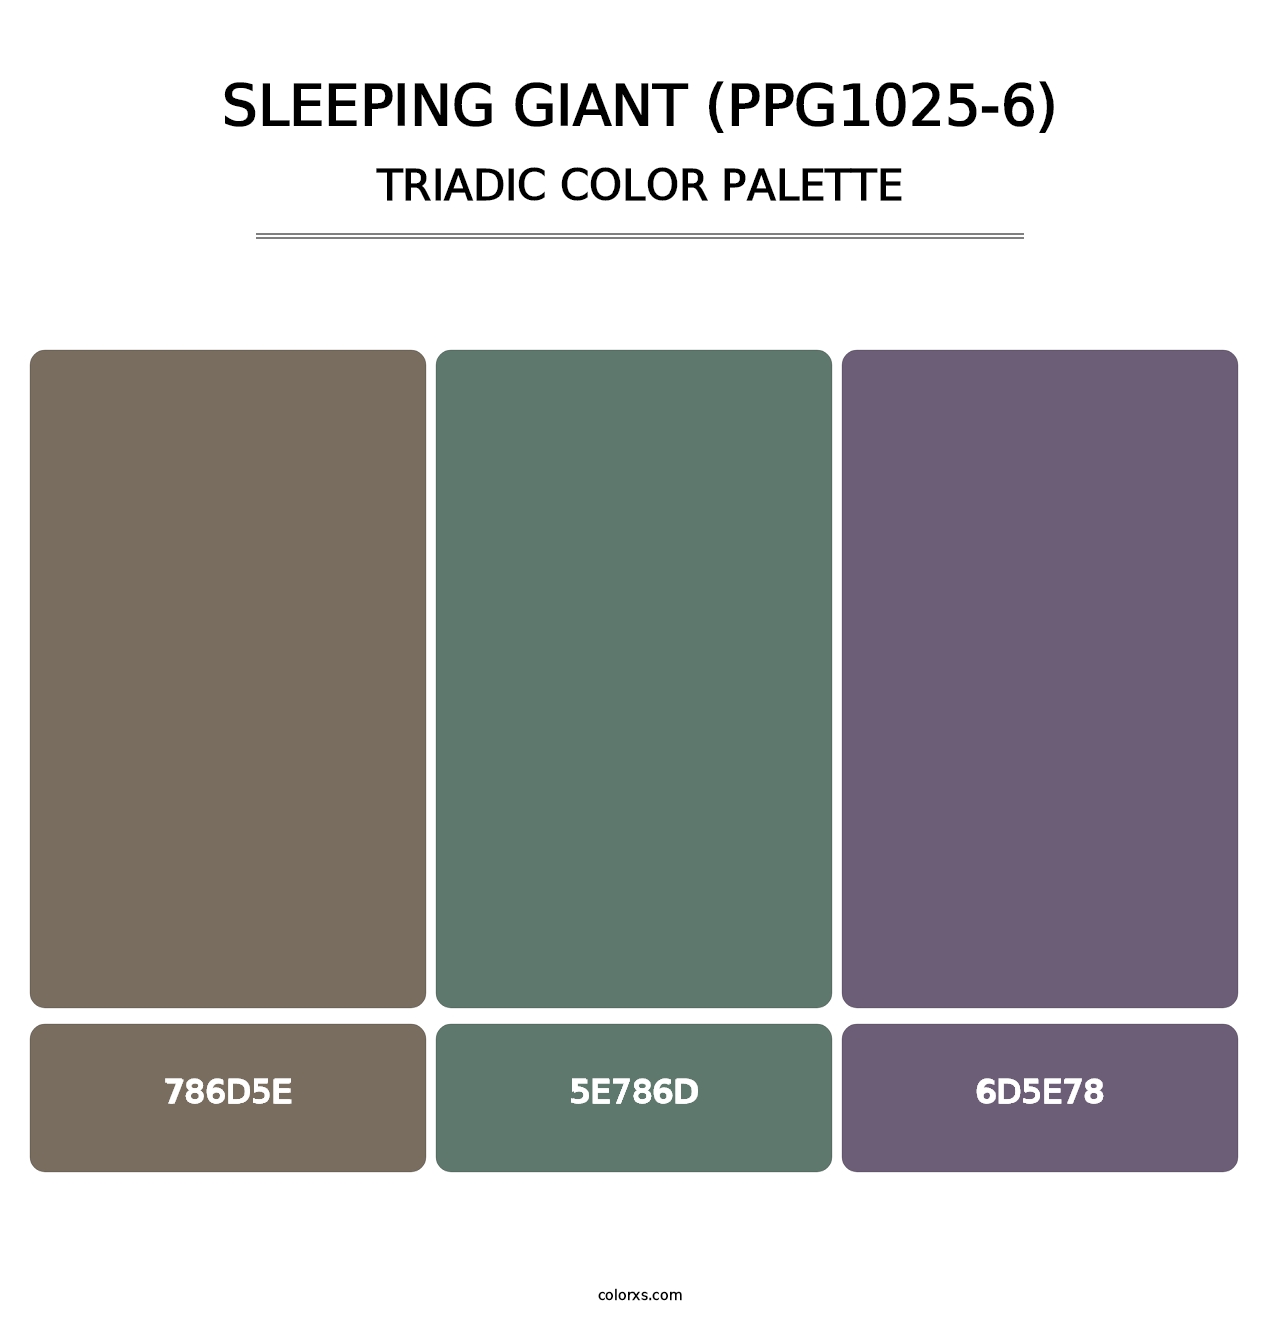 Sleeping Giant (PPG1025-6) - Triadic Color Palette